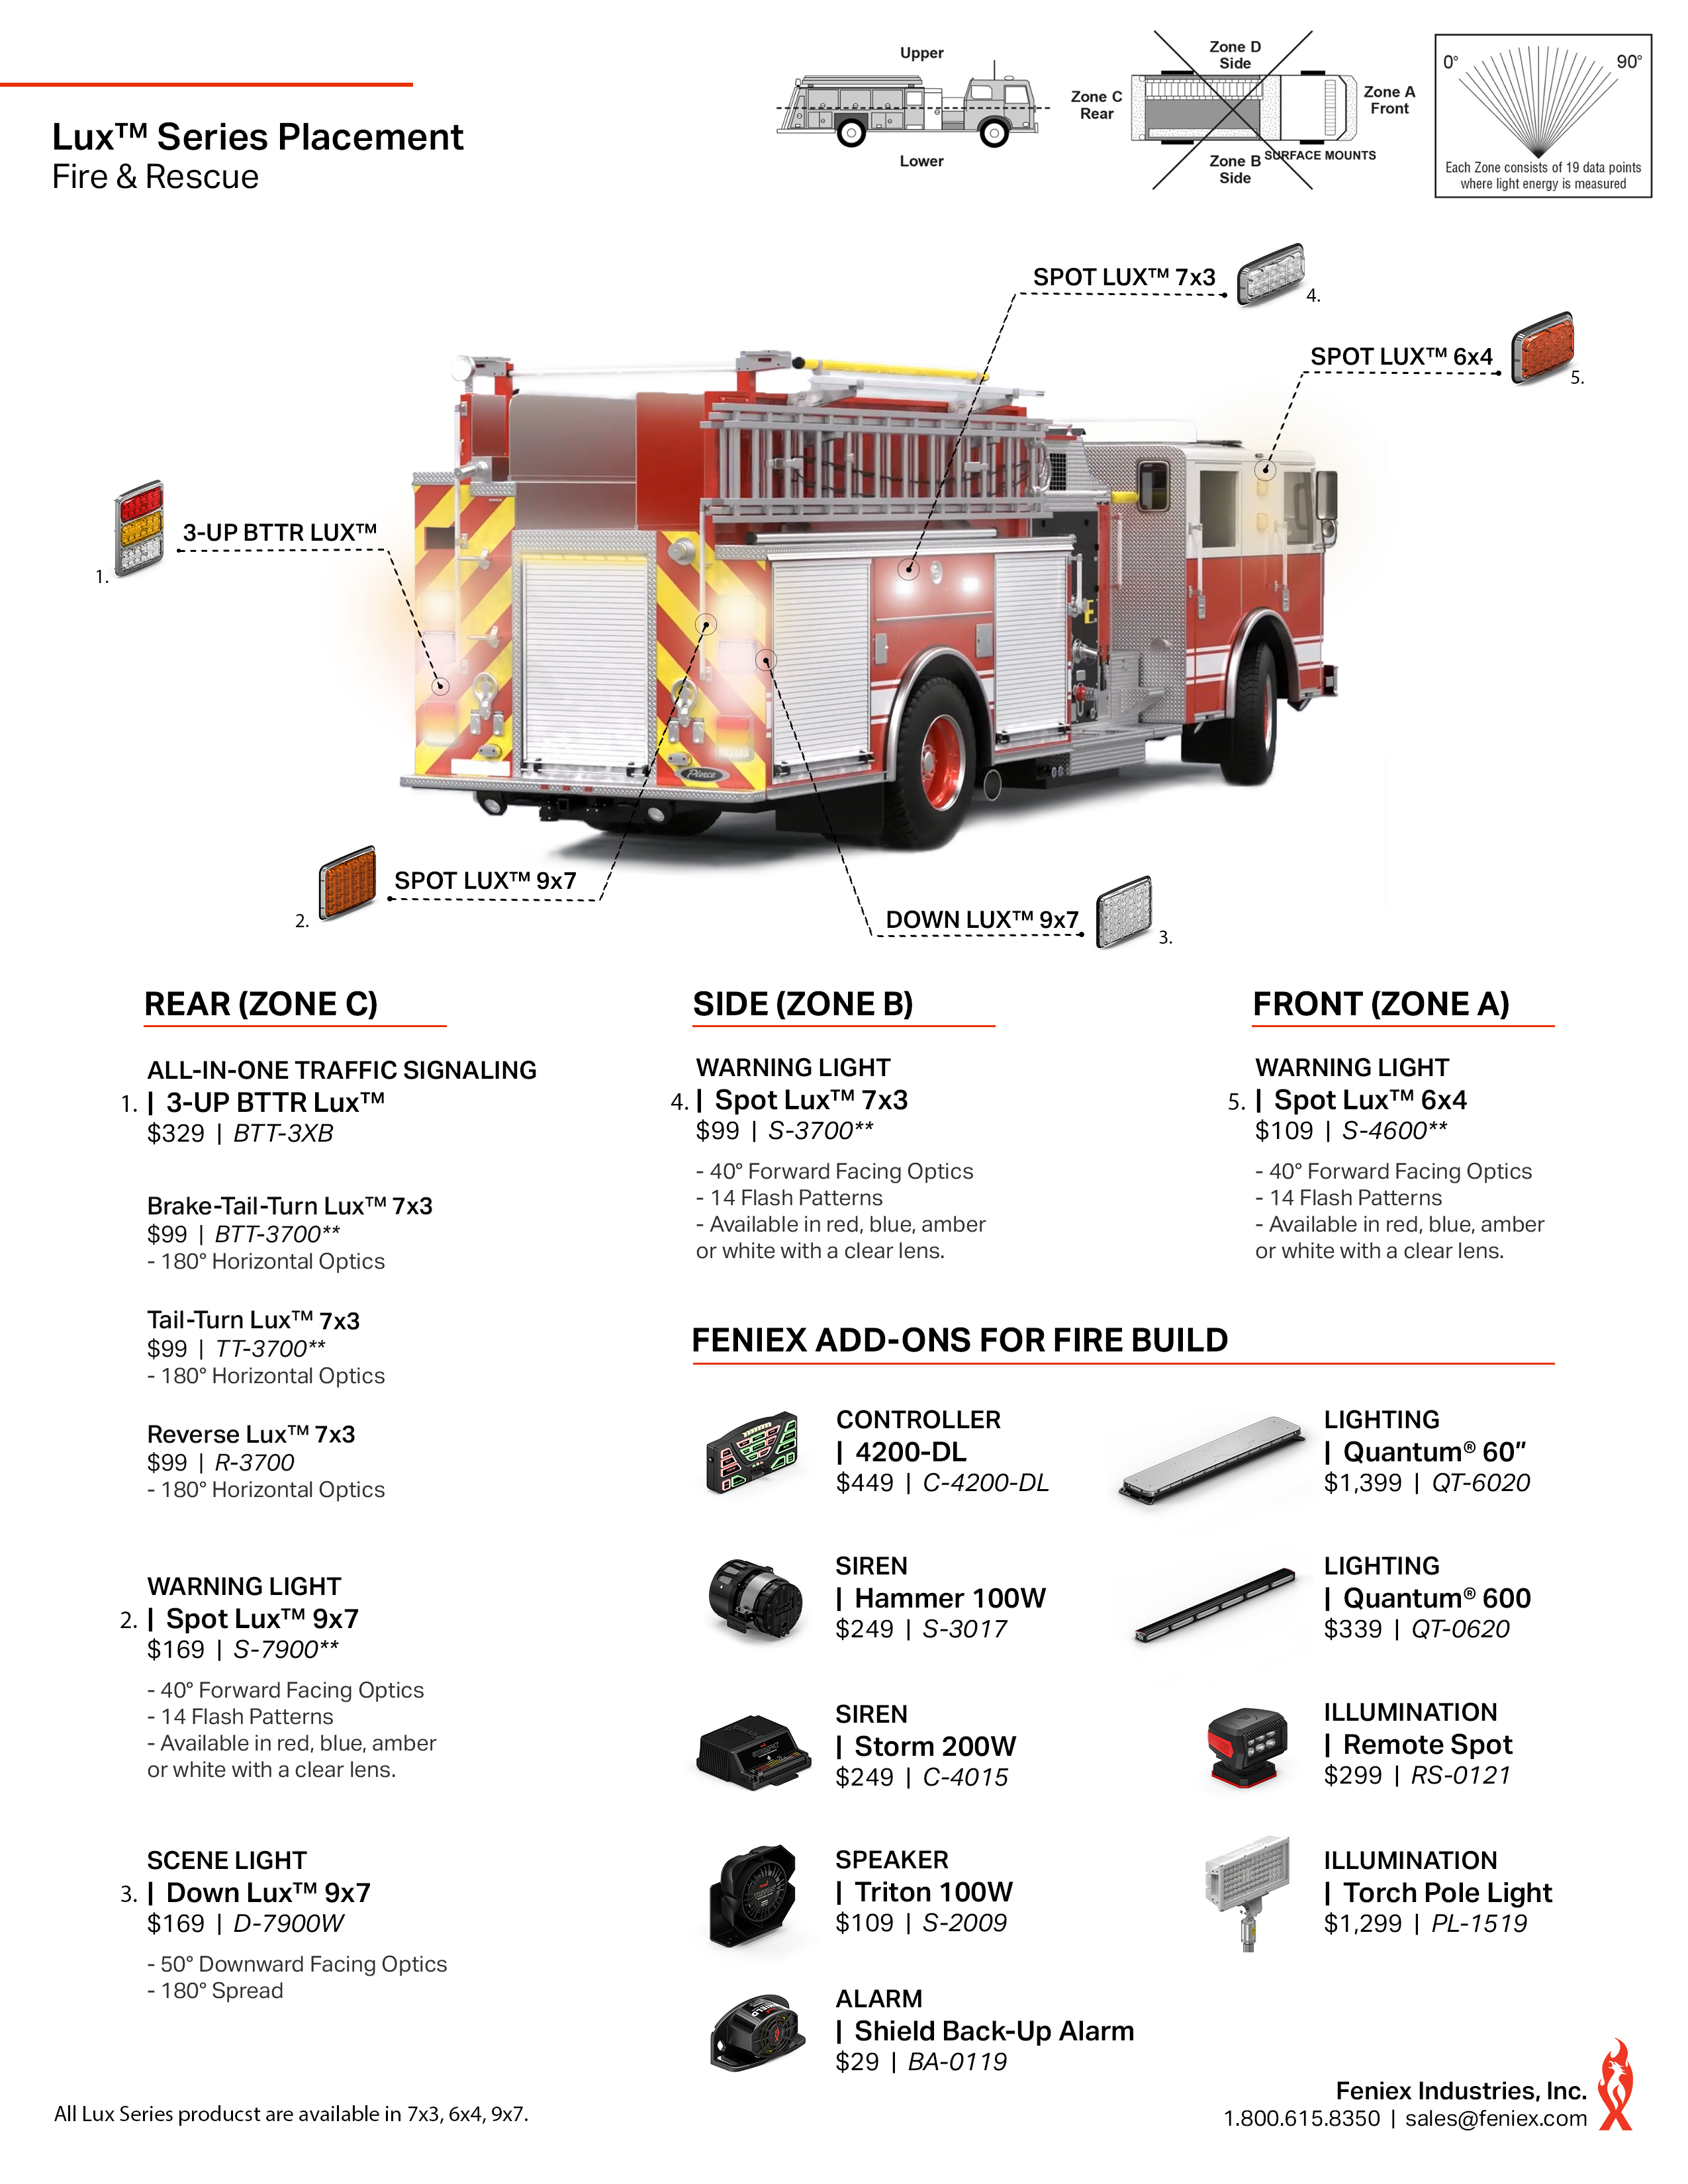 Lux Series Fire Truck Infographic